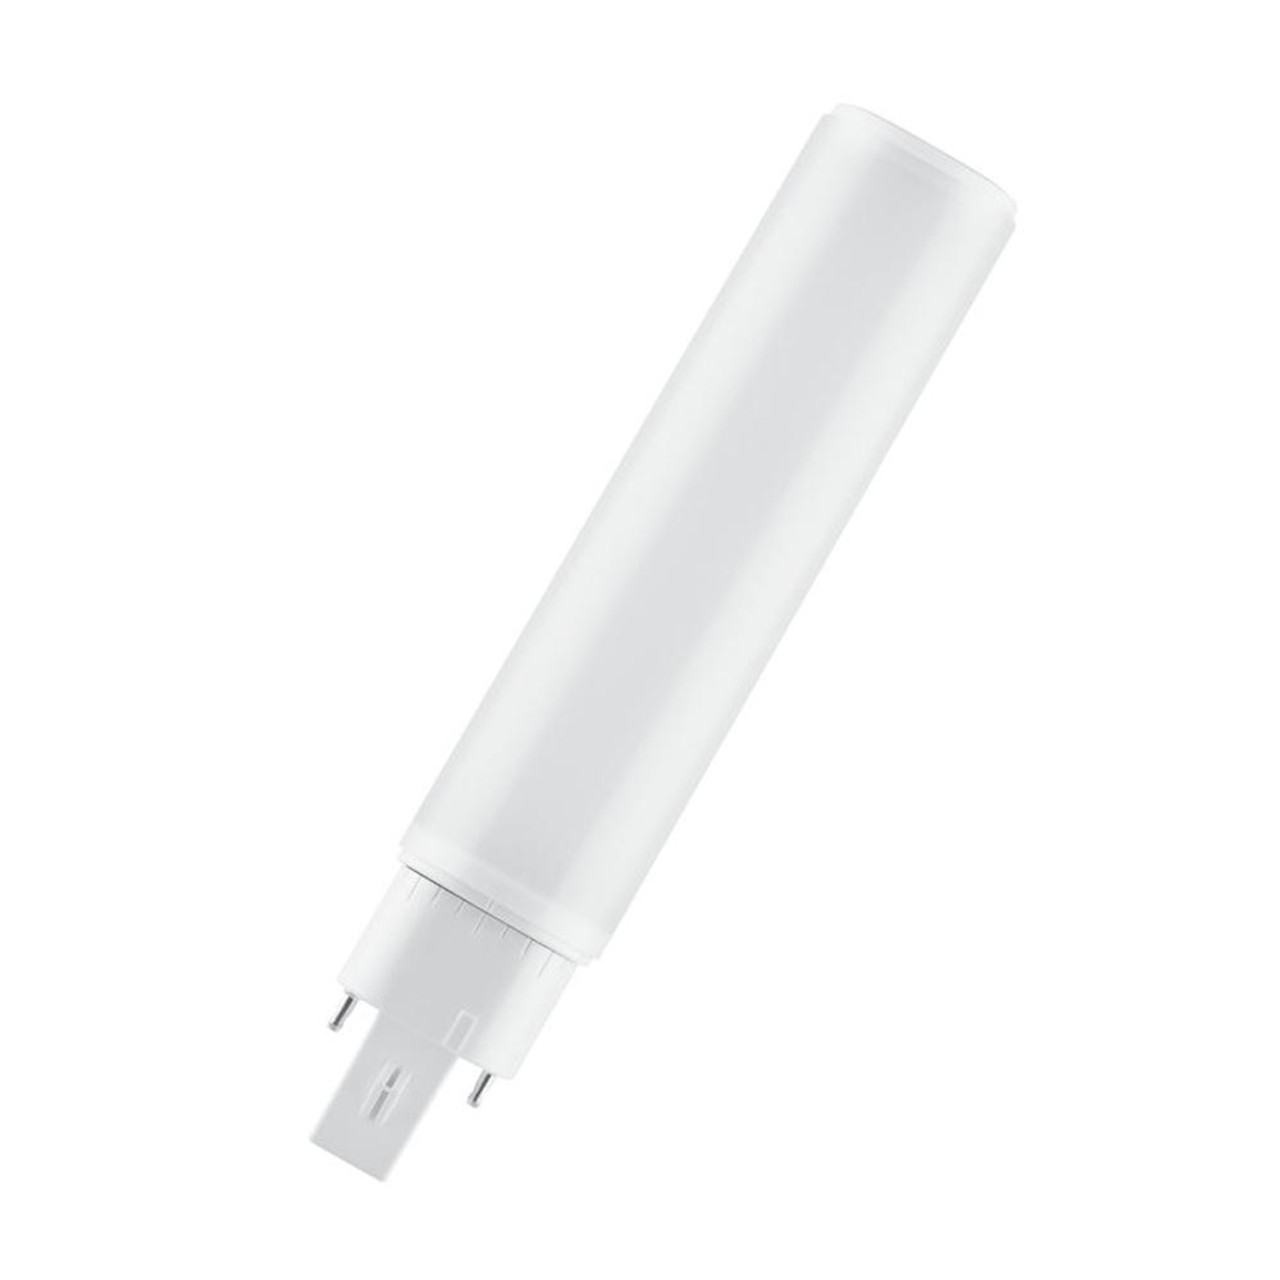 LED PL-C 10W (26W eq.) 4 Pin G24q-3 Cool White Dulux High Frequency and AC Mains